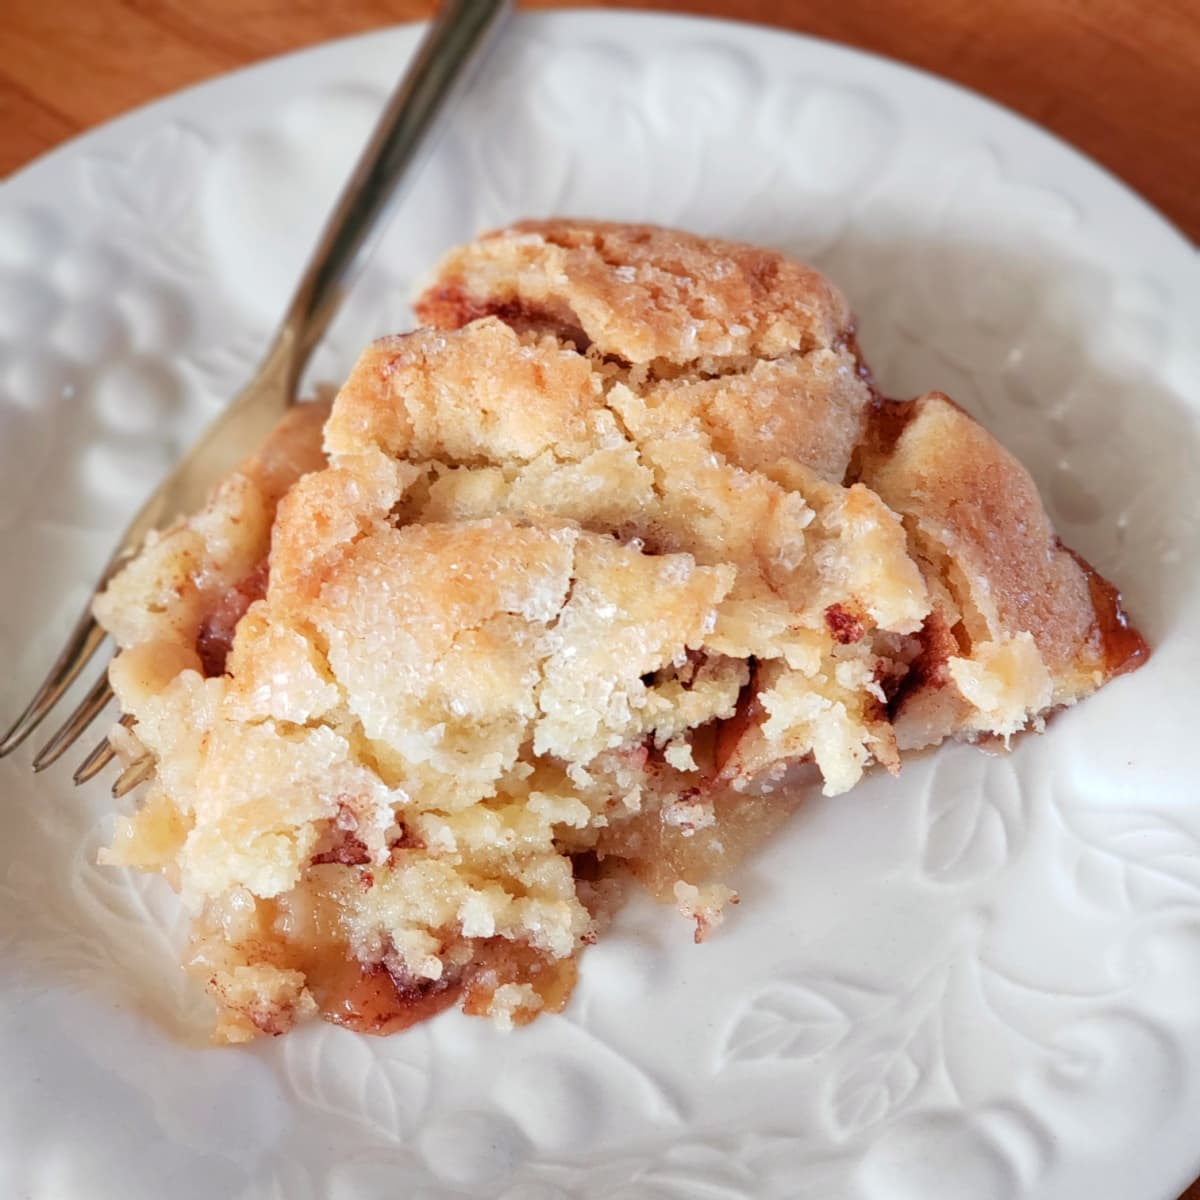 Slice of Swedish Apple Pie on a testured white plate with a fork alongside